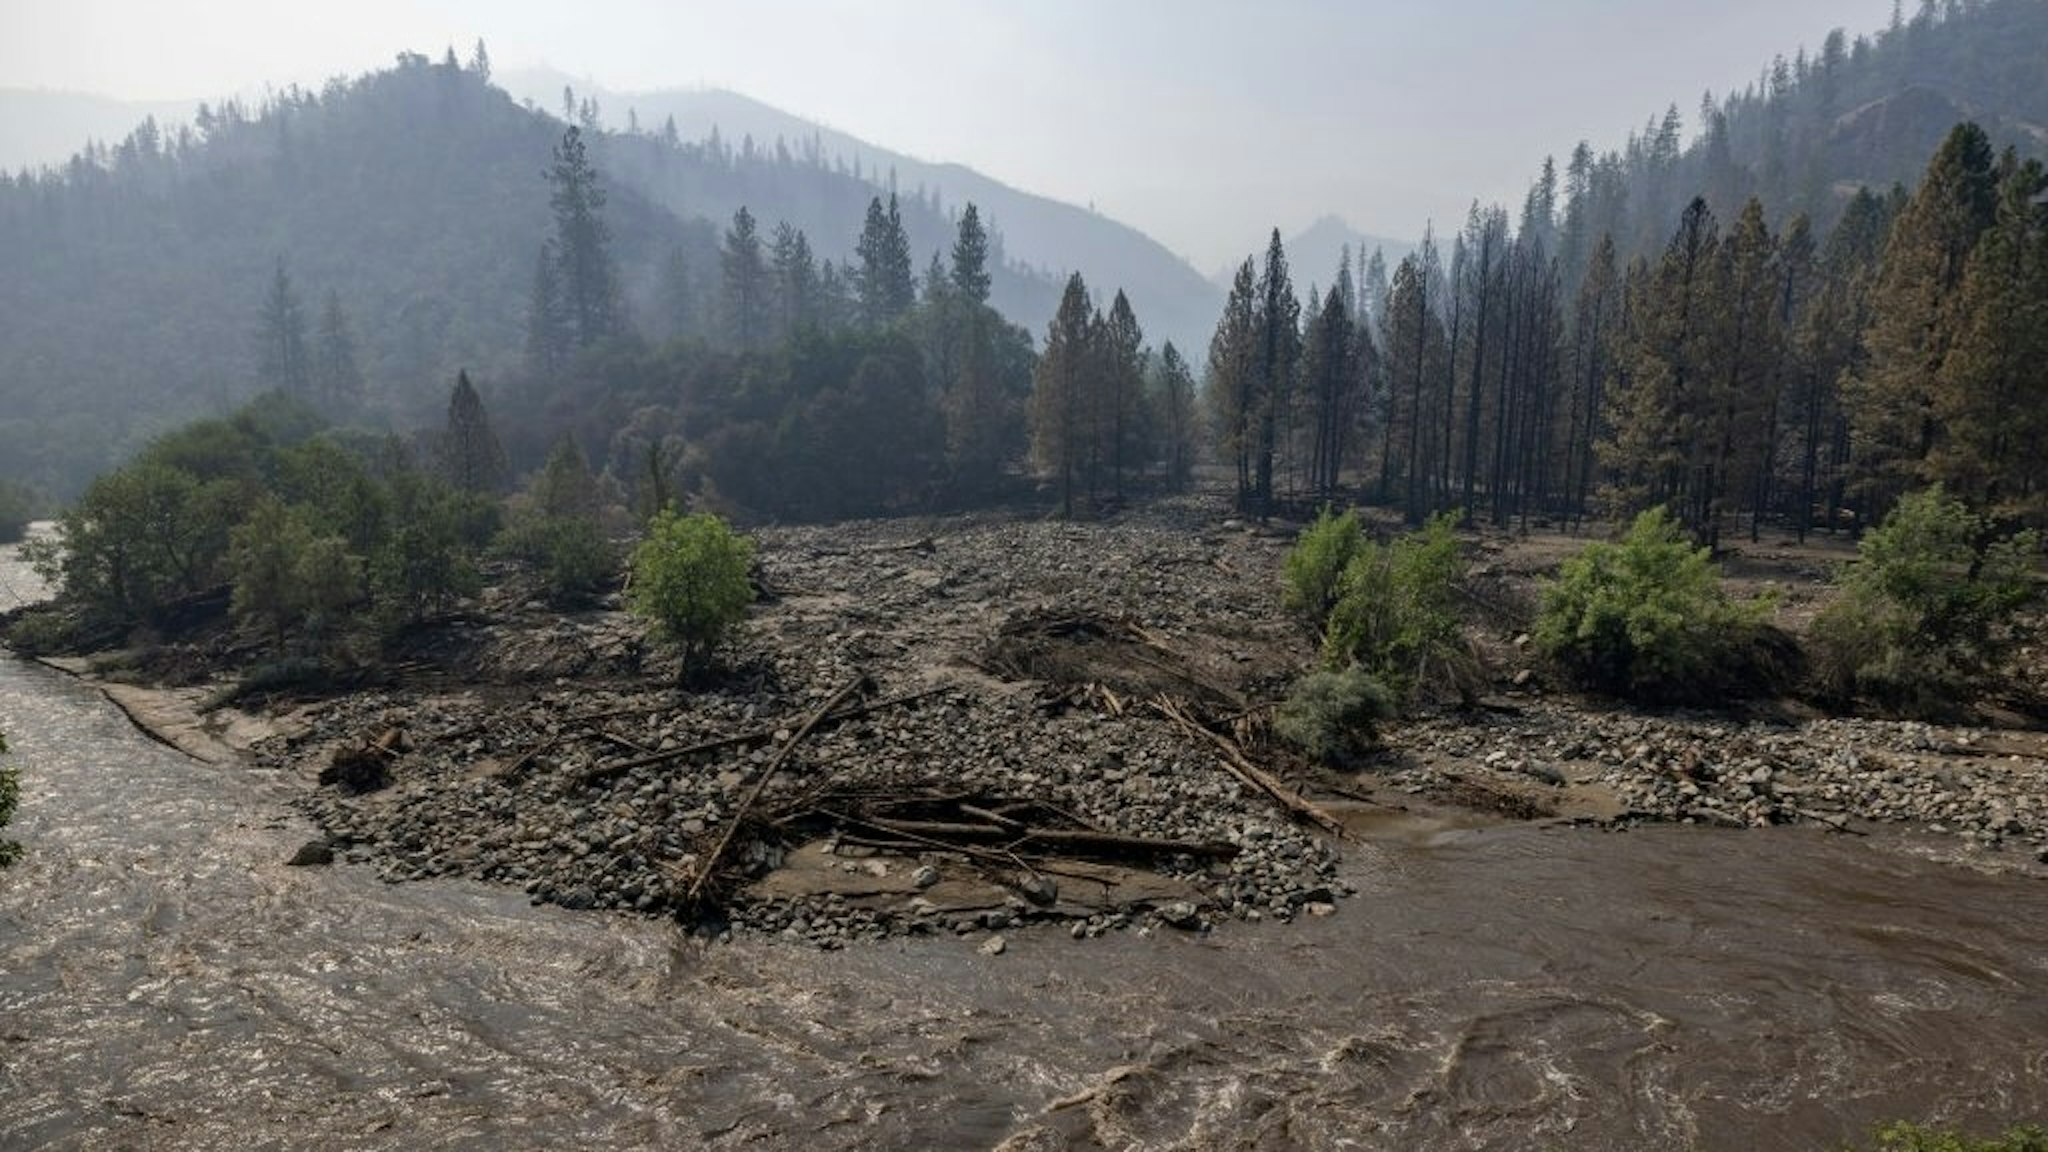 US-ENVIRONMENT-CALIFORNIA-FIRE The Klamath River runs brown with mud after flash floods hit the McKinney Fire in the Klamath National Forest near Yreka, California, on August 3, 2022. - At least four people are now known to have died in a wildfire sweeping through California, authorities said on August 2, as they warned the toll from the state's worst blaze this year could rise further. The fire, which is burning in the Klamath National Forest near the border with Oregon, is California's largest this year, having consumed around 56,000 acres (22,600 hectares). (Photo by DAVID MCNEW / AFP) (Photo by DAVID MCNEW/AFP via Getty Images) DAVID MCNEW / Contributor